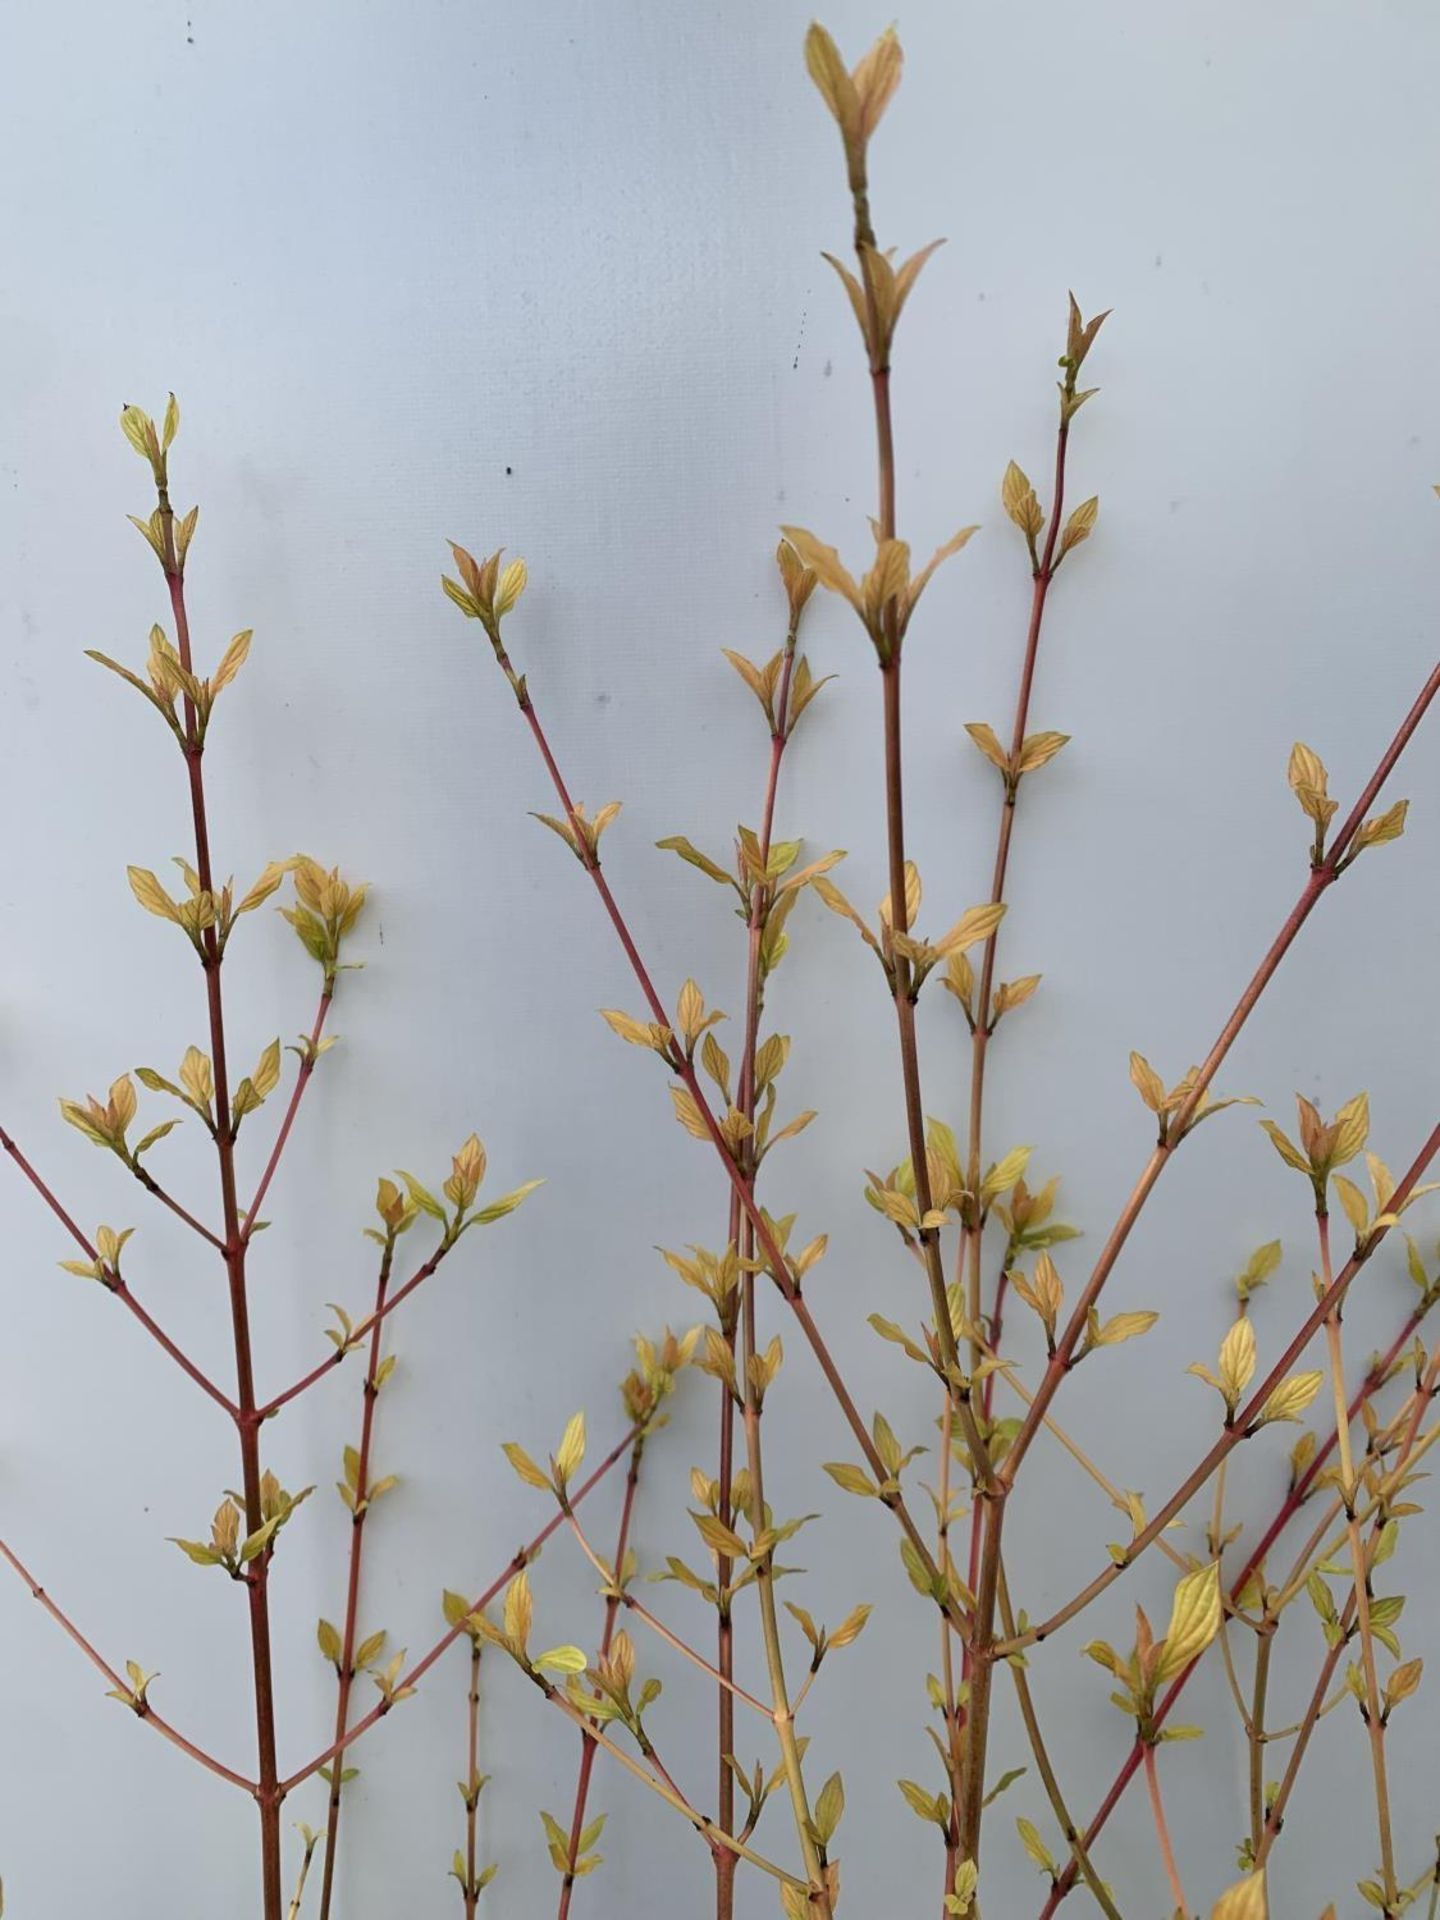 TWO CORNUS SANGUINEA 'MIDWINTER FIRE' IN 4 LTR POTS APPROX 90CM IN HEIGHT PLUS VAT TO BE SOLD FOR - Image 6 of 10